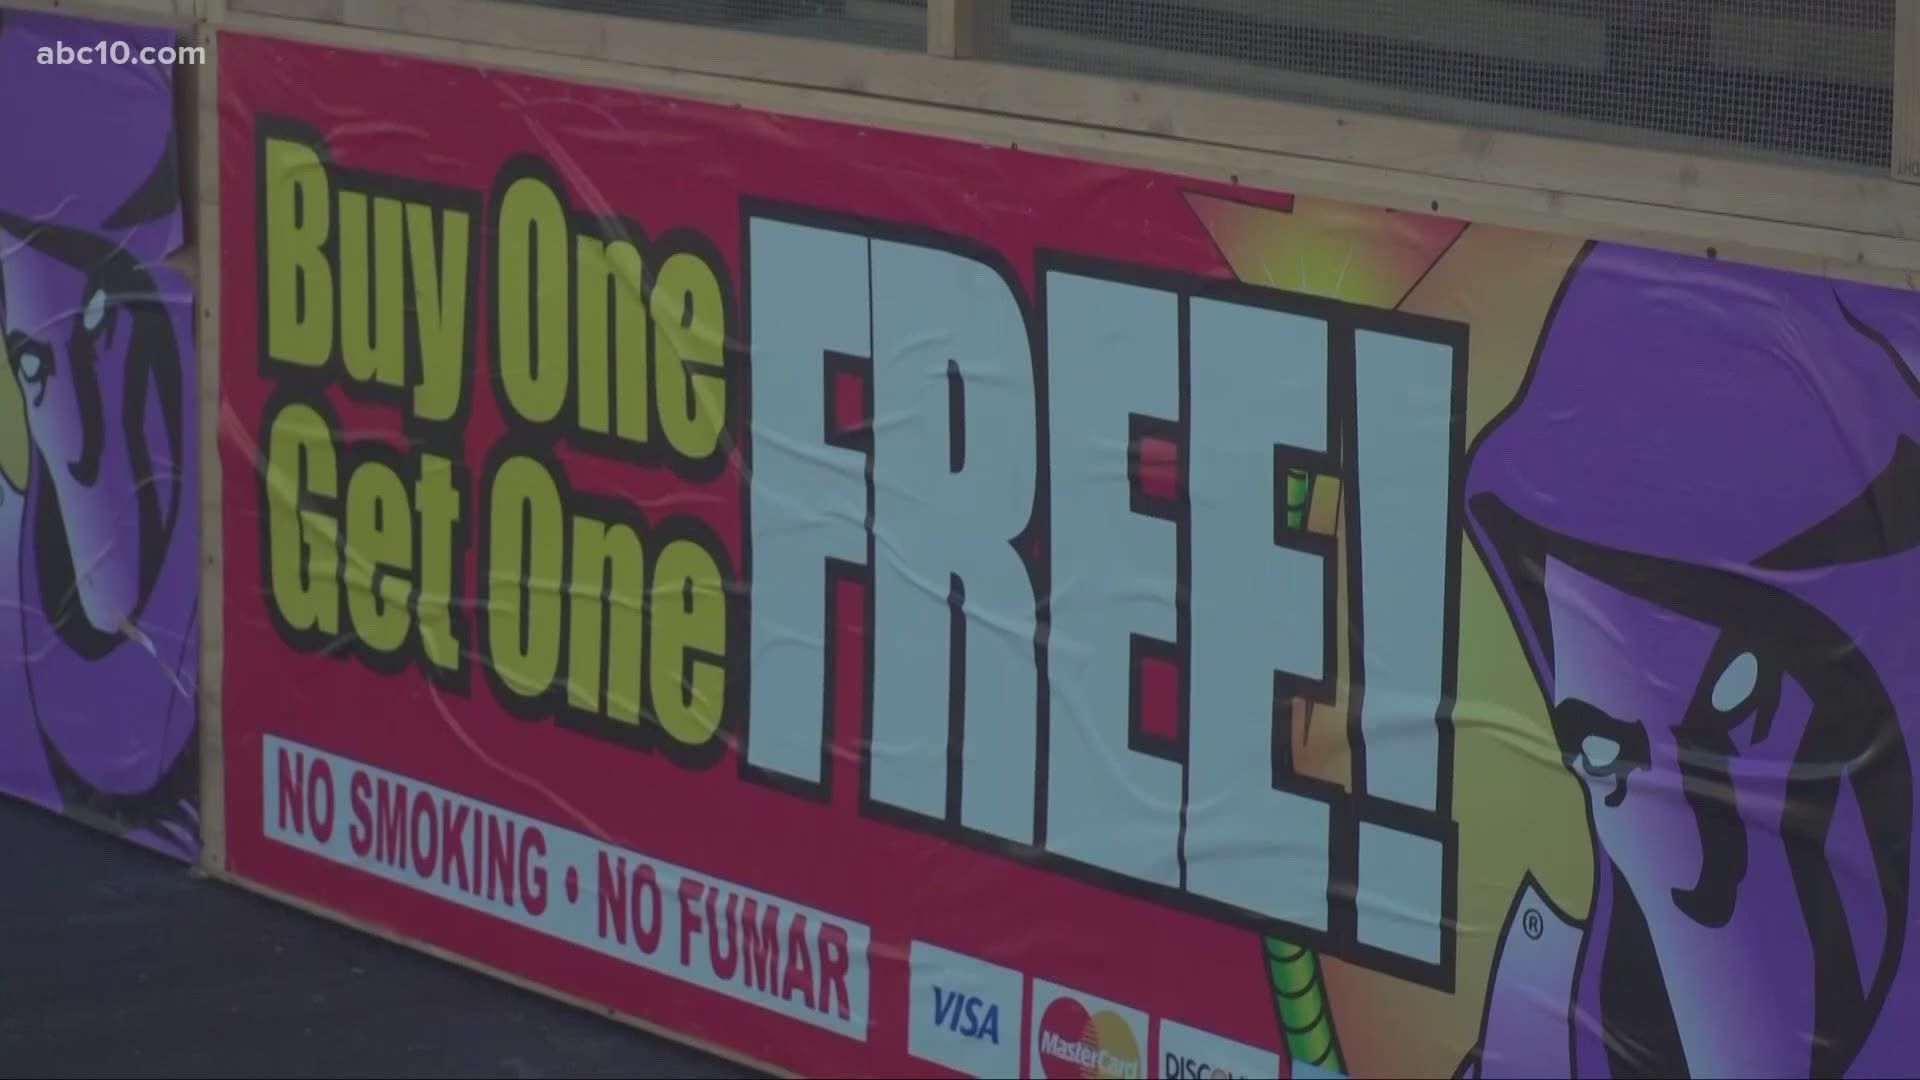 Some cities have adopted ordinances to crackdown on illegal fireworks use.